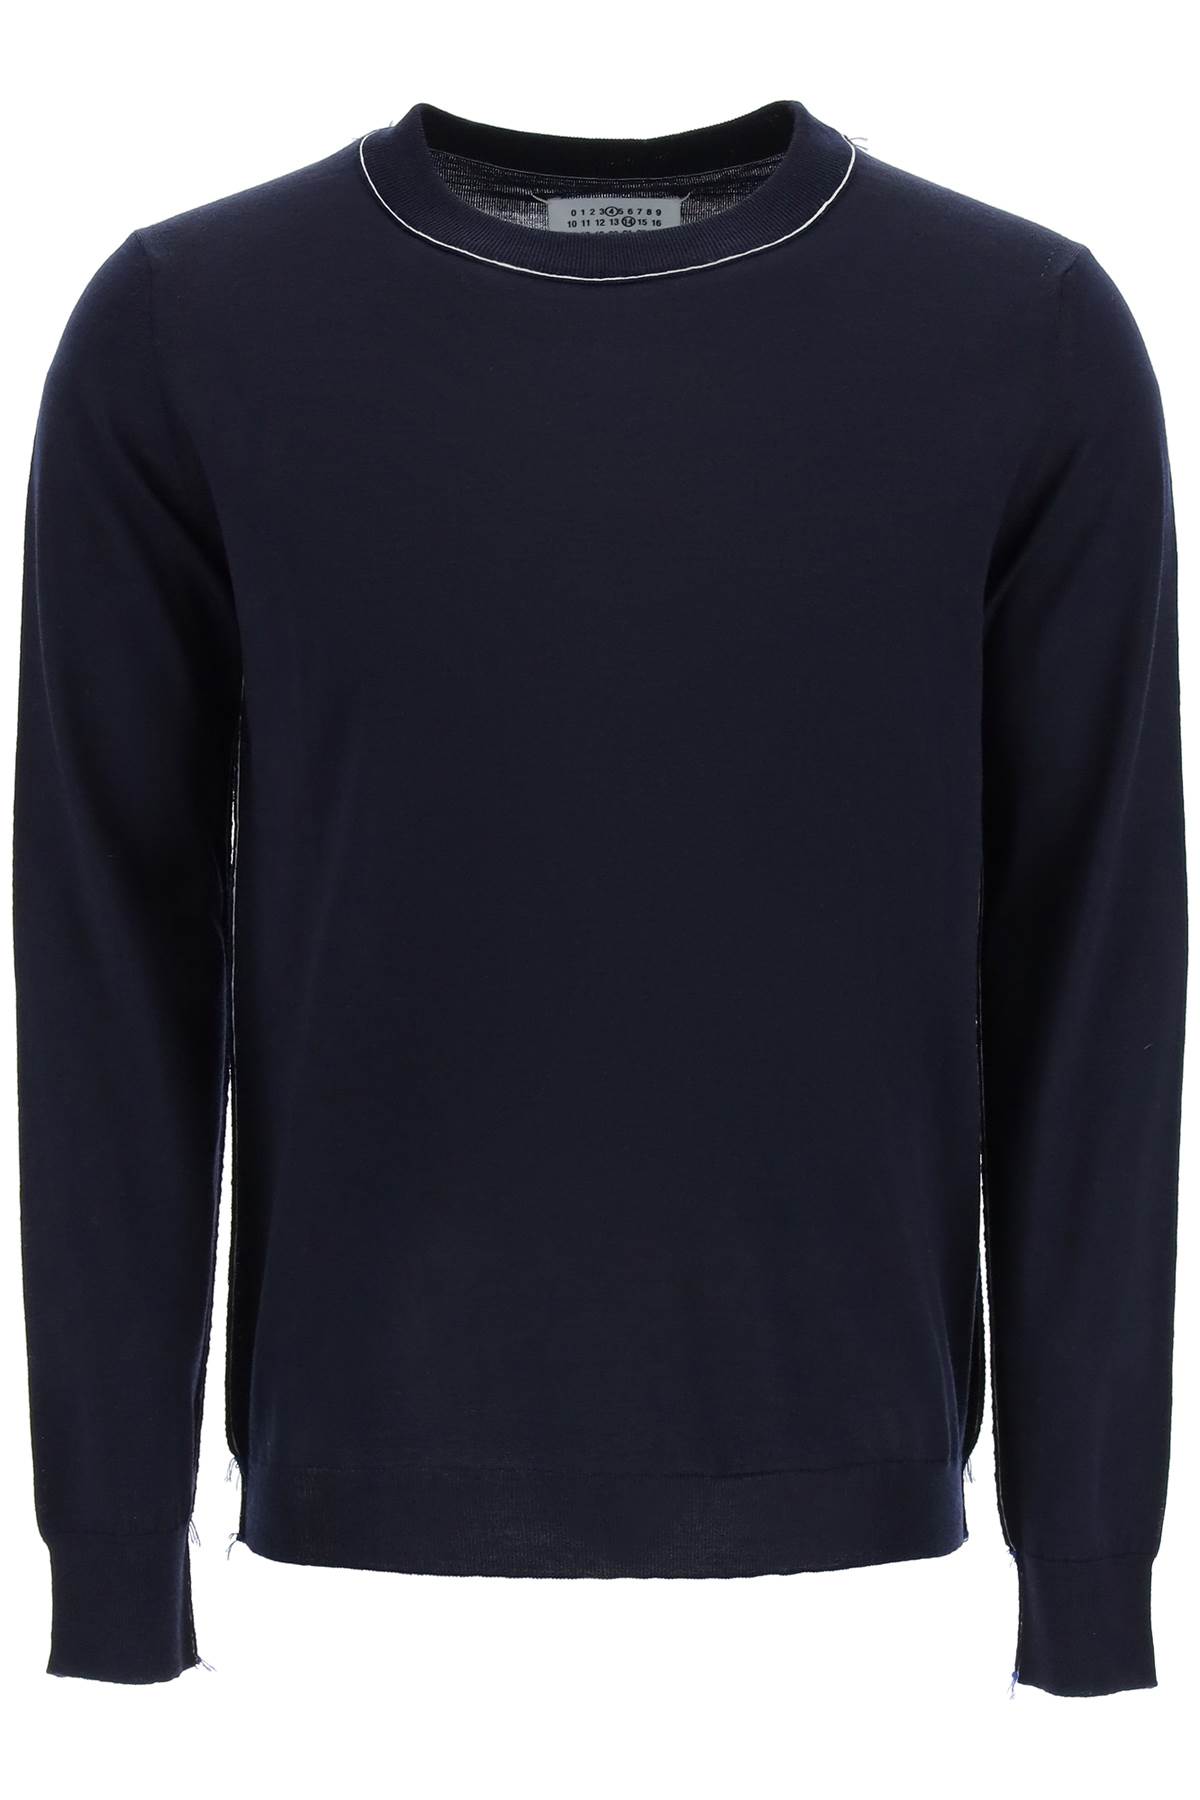 Maison Margiela Wool Sweater With Inside-out Seams